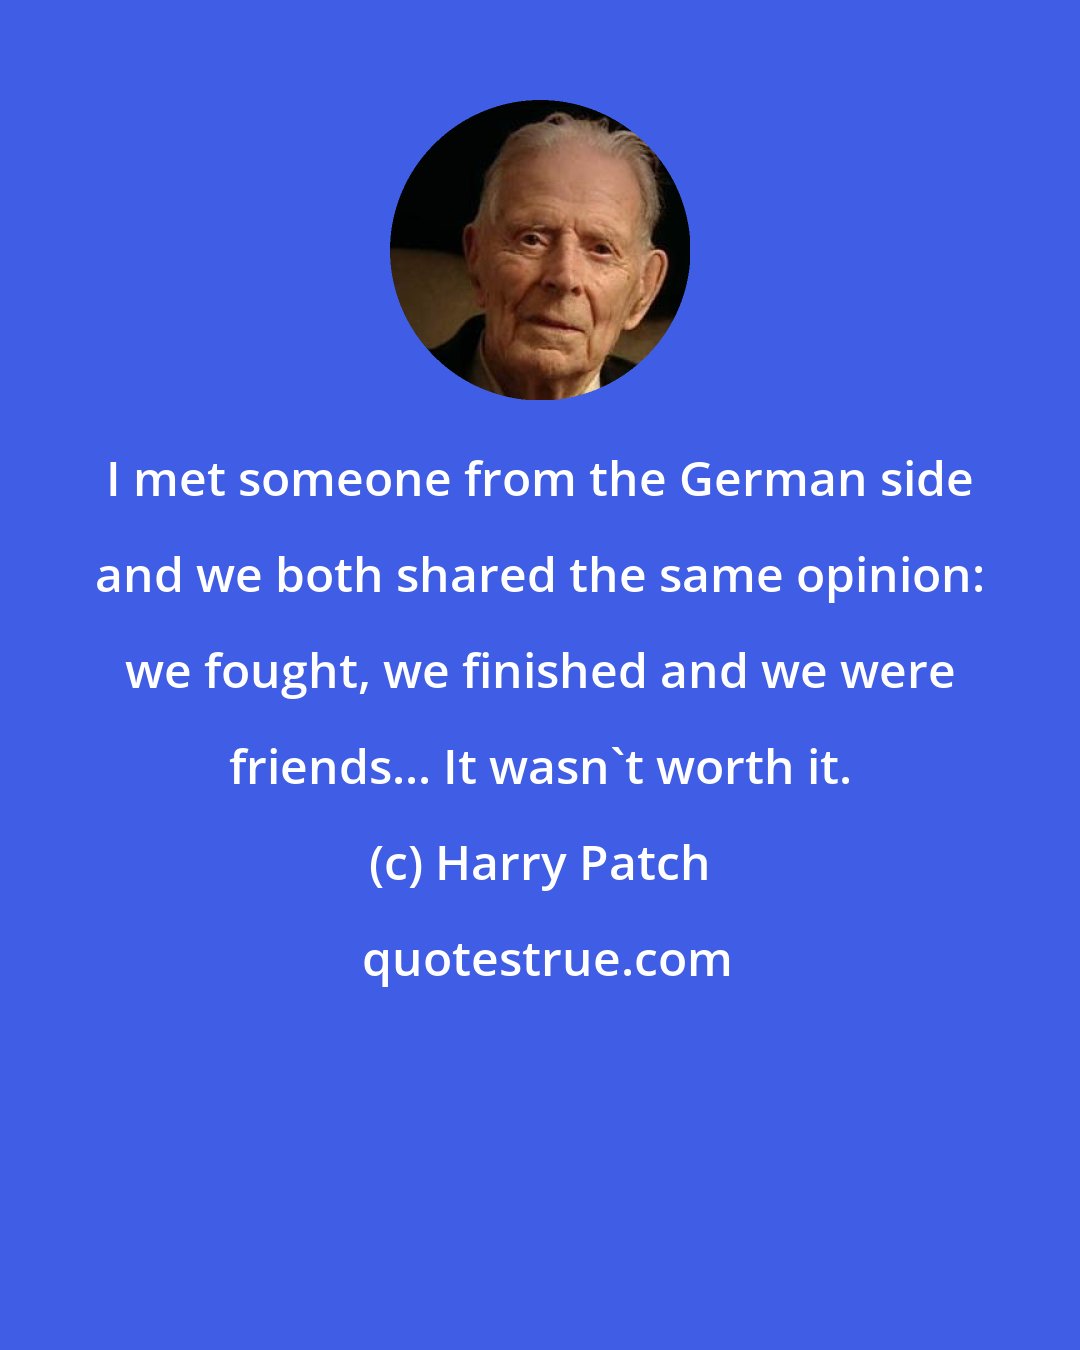 Harry Patch: I met someone from the German side and we both shared the same opinion: we fought, we finished and we were friends... It wasn't worth it.